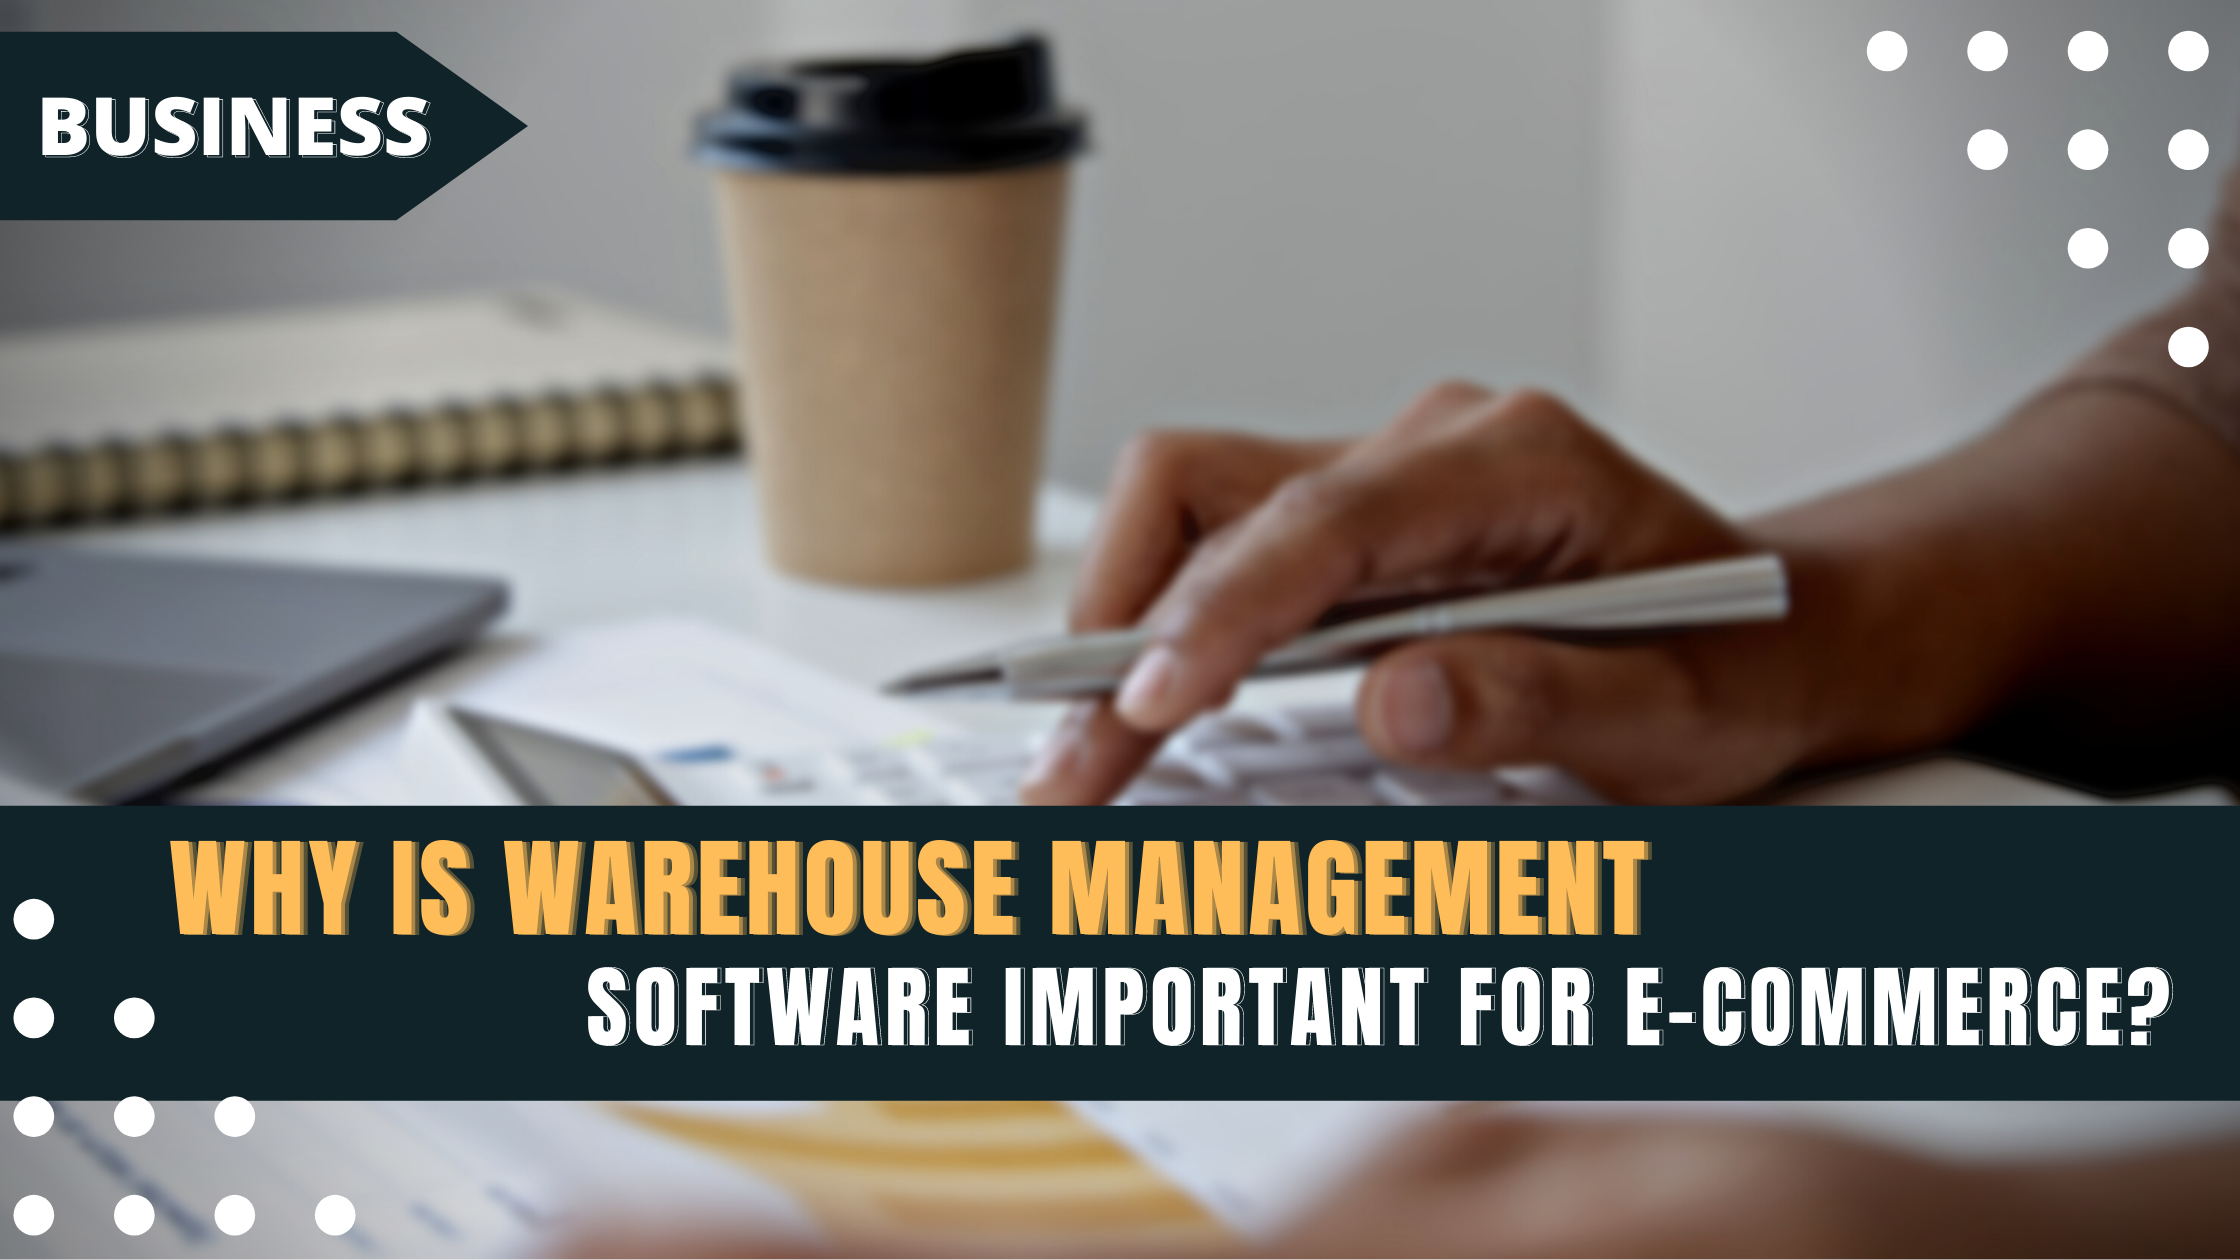 Why Is Warehouse Management Software Important for E-commerce?